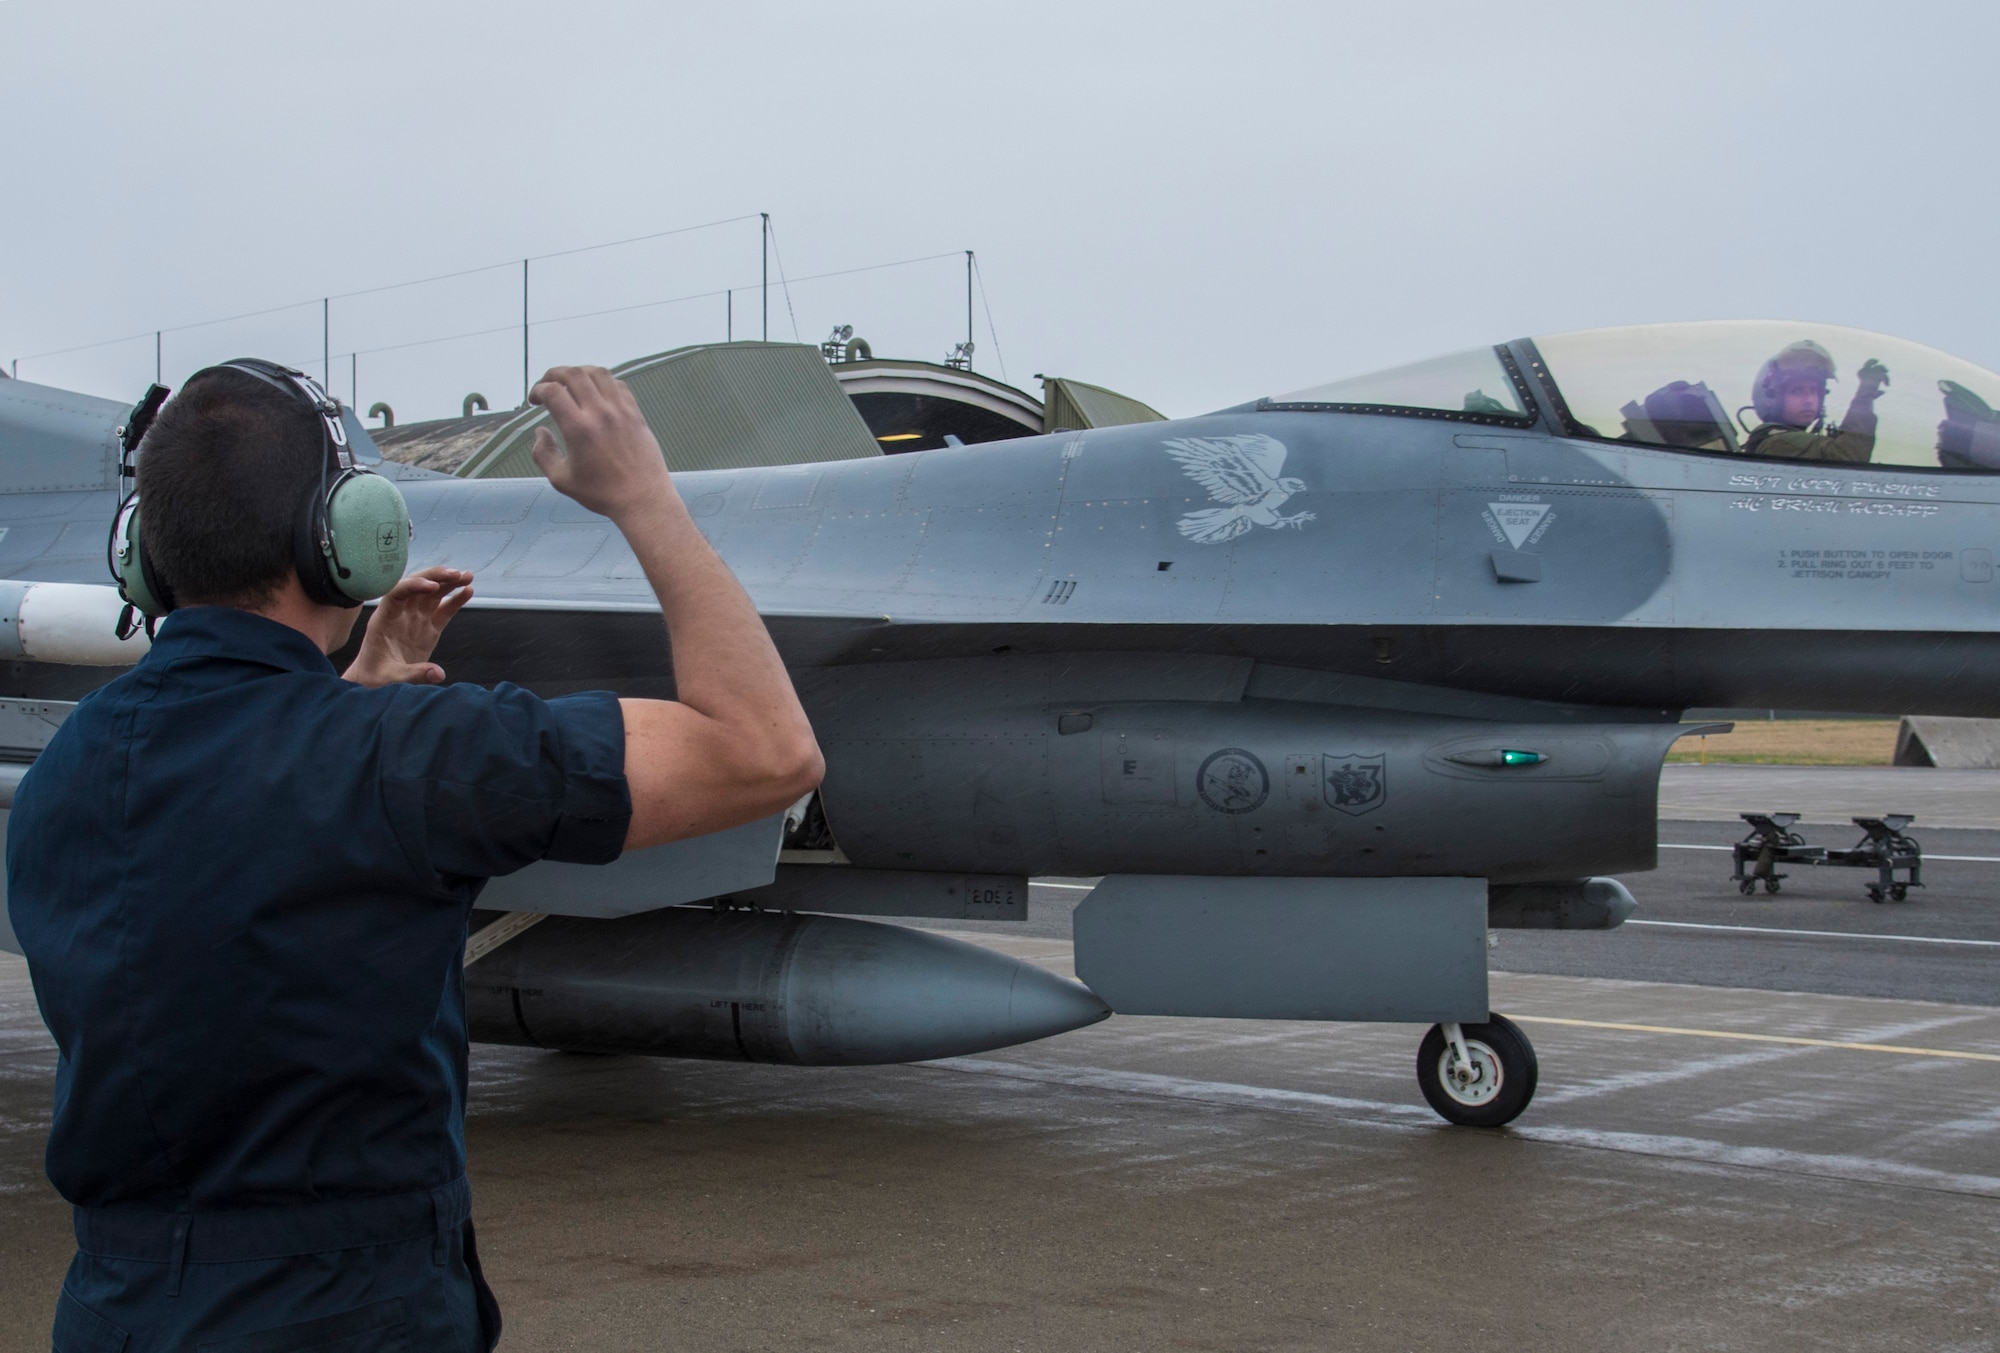 U.S. Air Force Airman 1st Class Mathew Flores, a crew chief with the 35th Aircraft Maintenance Squadron, signals the panther claw to Capt. Nicolas Dewulf, a pilot with the 13th Fighter Squadron, at Misawa Air Base, Japan, May 4, 2016. The panther claw represents the mascot of the 13th FS, the panther, and is displayed as a tradition. (U.S. Air Force photo by Airman 1st Class Jordyn Fetter)